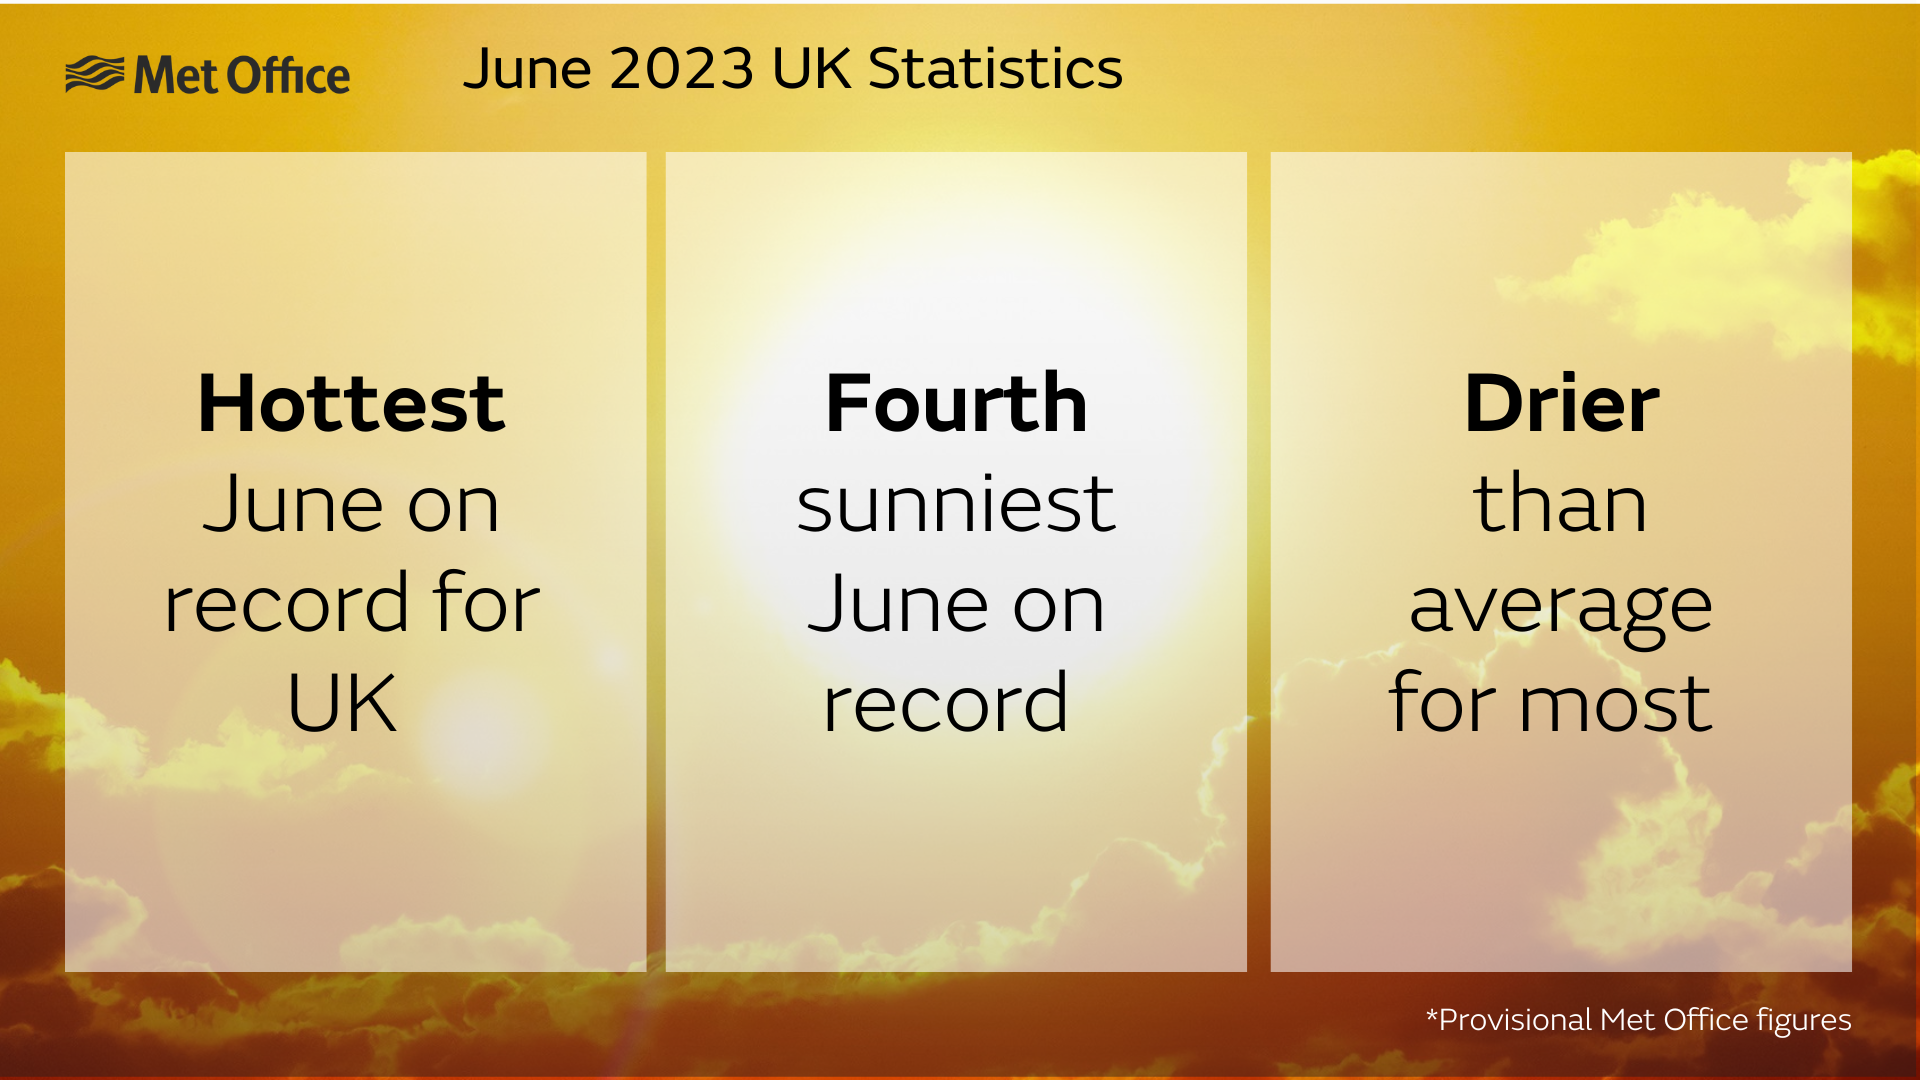 June 2023 UK provisional statistics. Hottest June on record for UK. Fourth sunniest June on record. Drier than average for most. This is according to provisional Met Office figures.